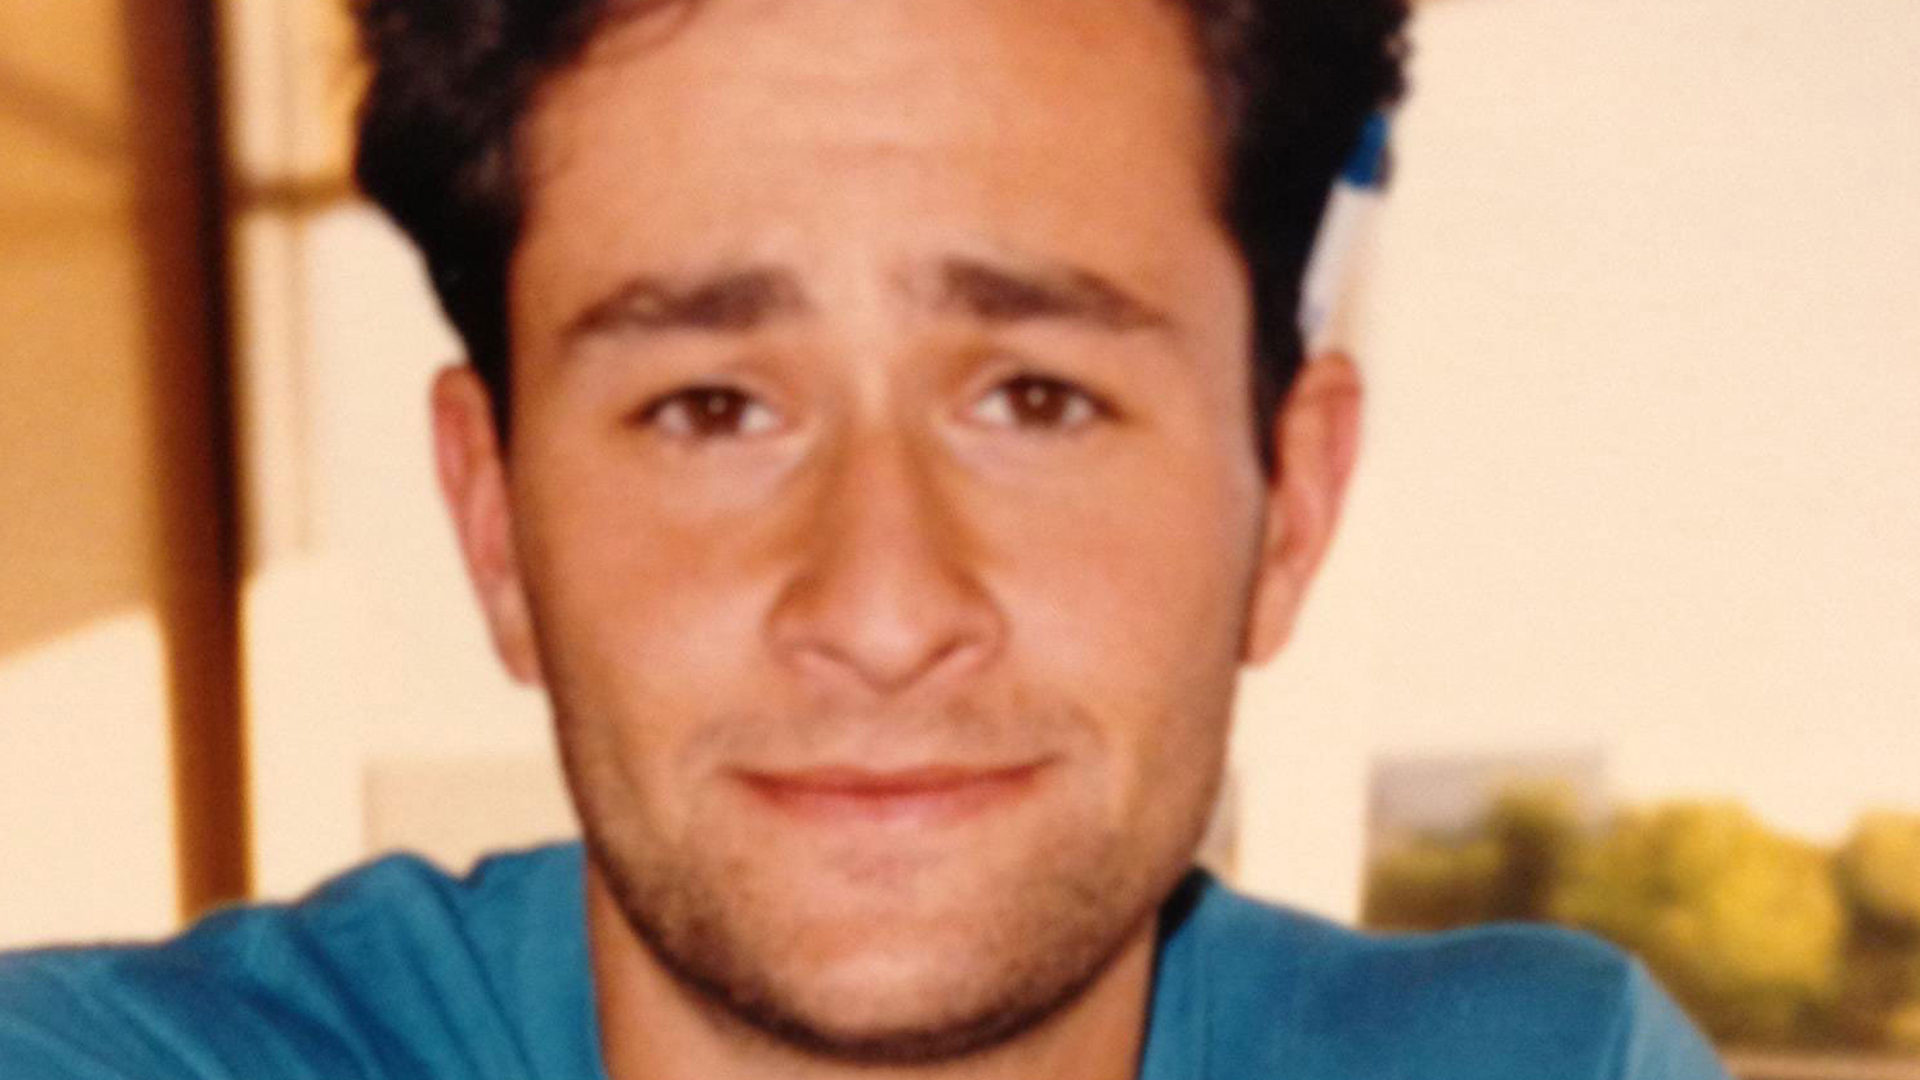 Kamala Harris’ husband unrecognizable in ‘devastatingly handsome’ throwback image as people say ‘we were all young once’ [Video]